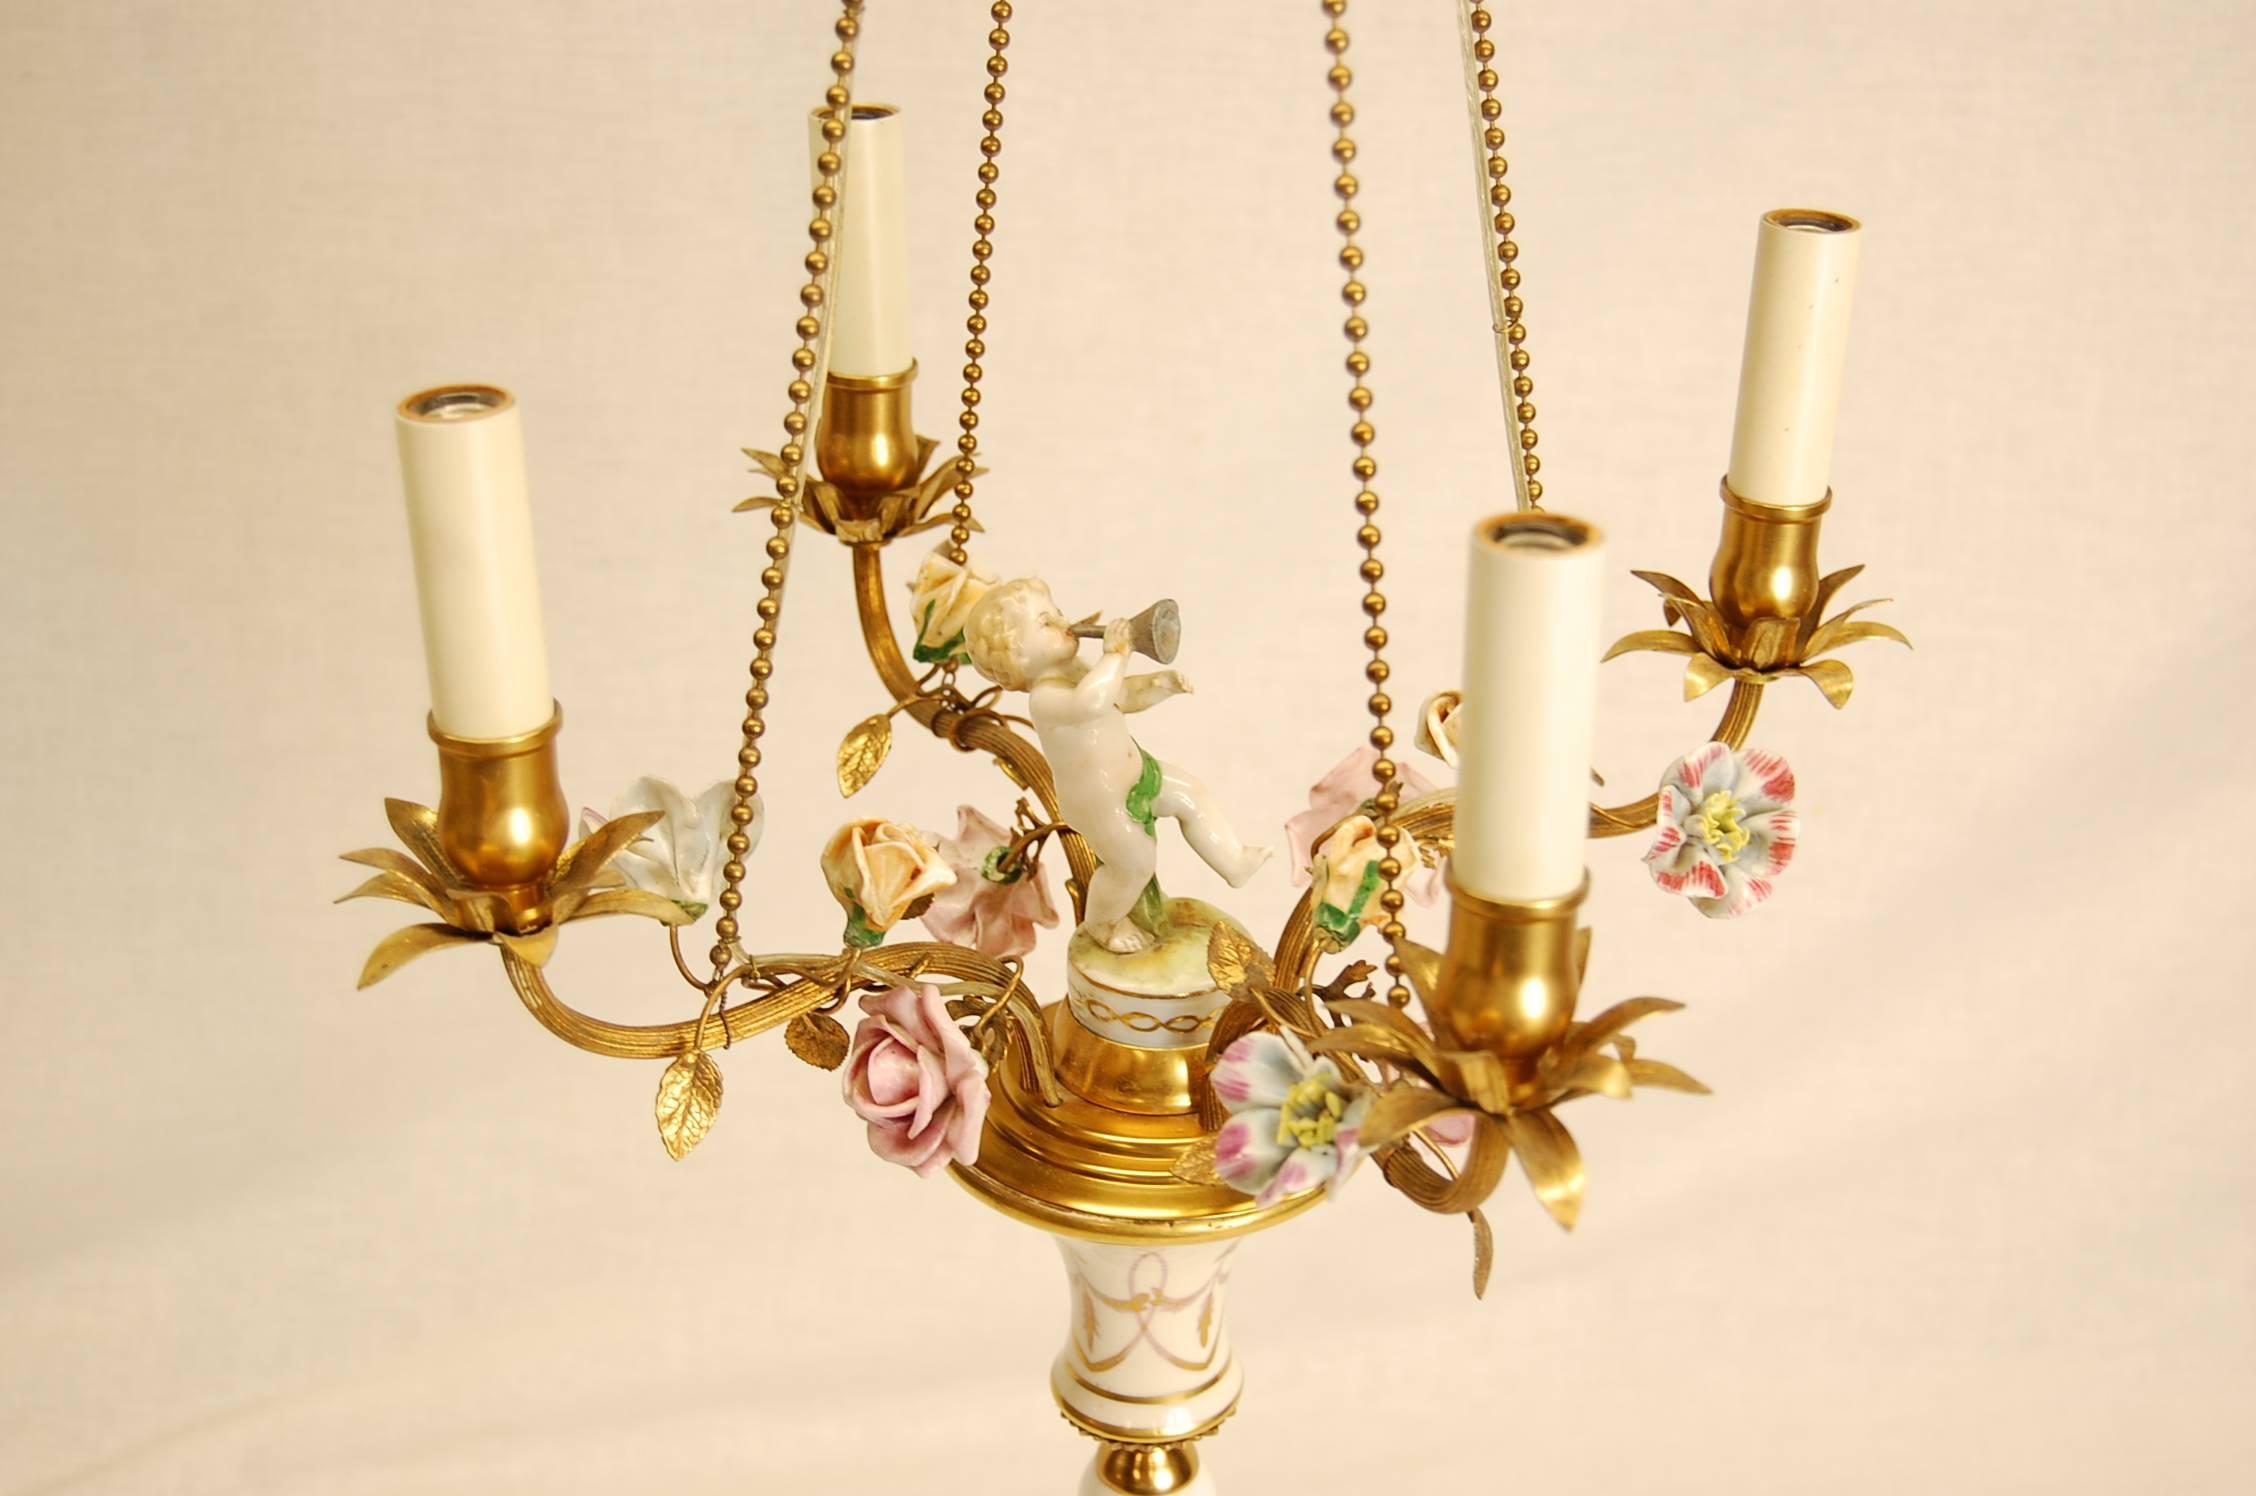 French Gilt Metal Chandelier with Hand-Painted Flowers, Early 20th Century 3